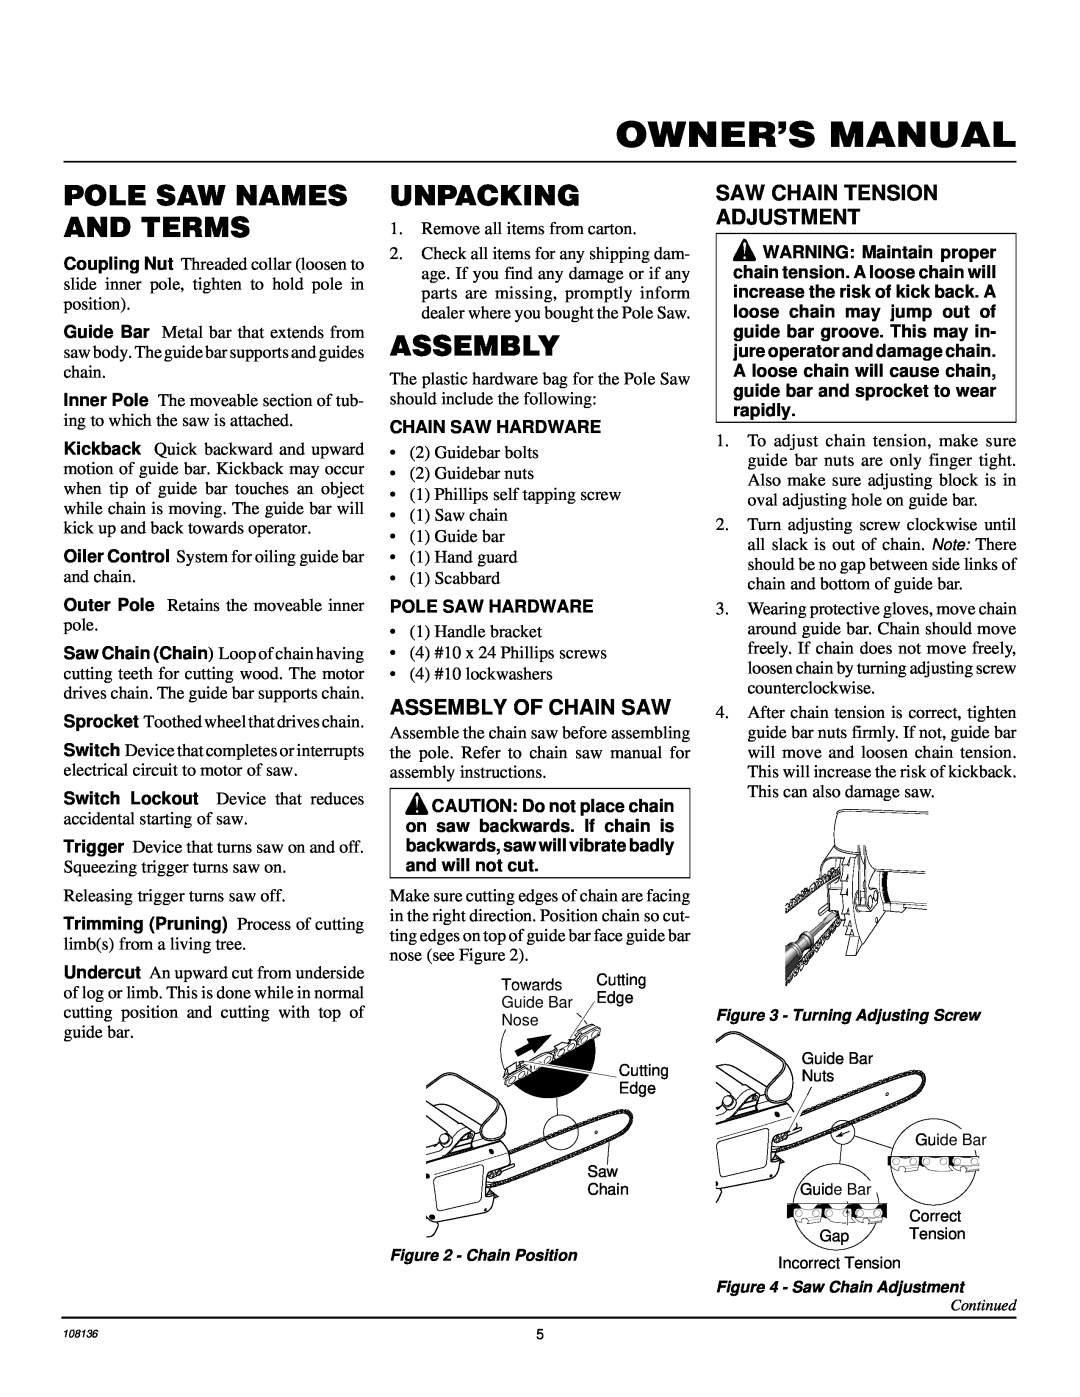 Remington RPS96 owner manual Pole Saw Names And Terms, Unpacking, Assembly Of Chain Saw, Saw Chain Tension Adjustment 